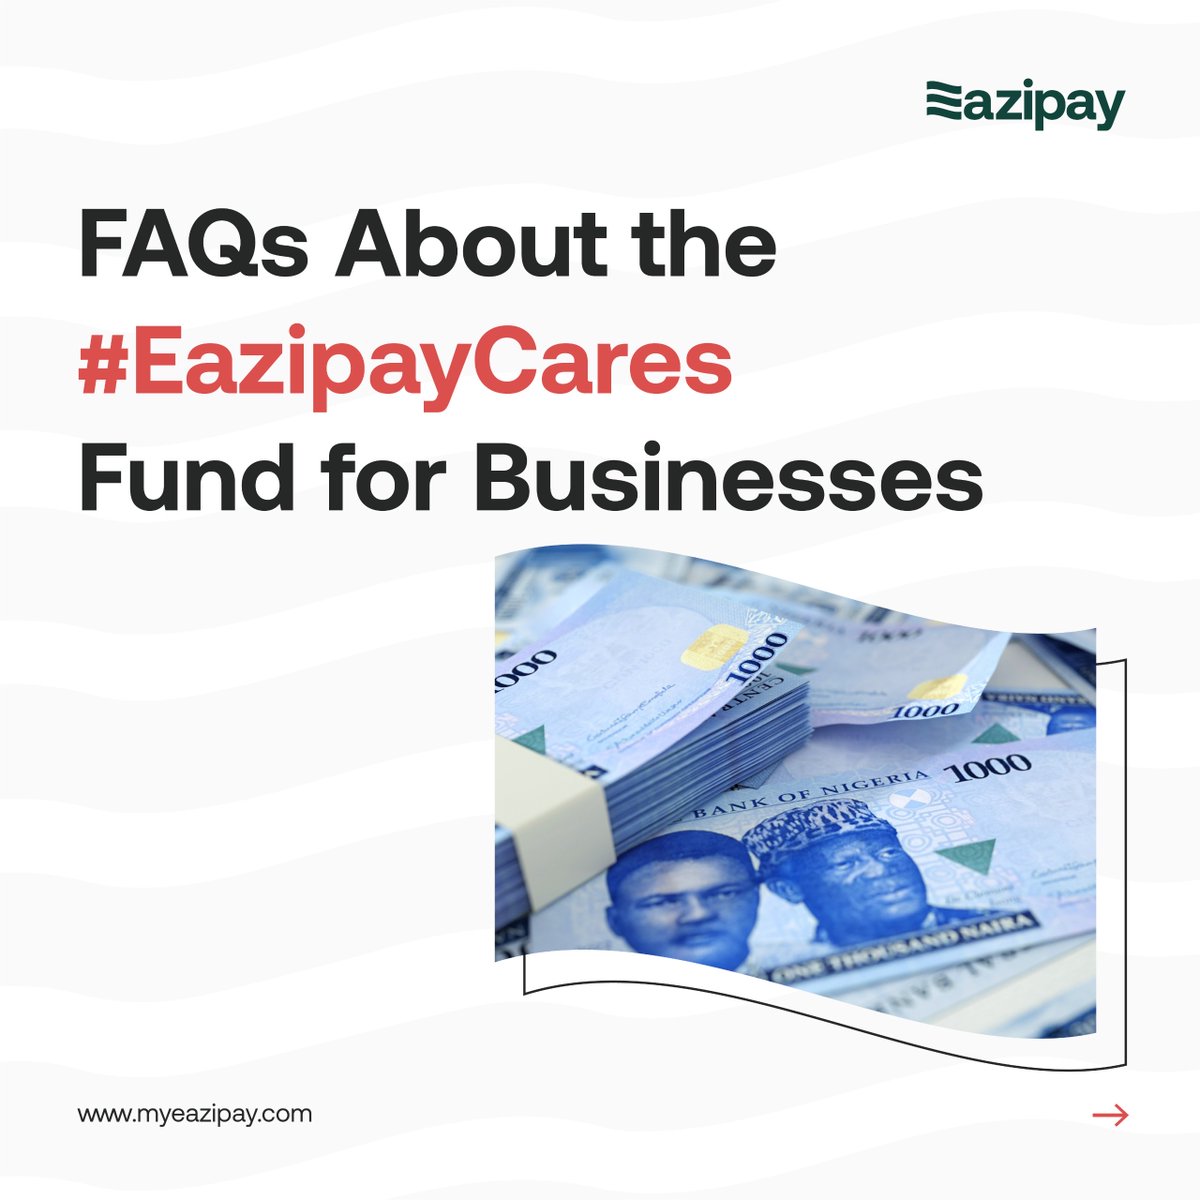 We thought you might have burning questions about the #EazipayCares campaign, so we have thoughtfully curated a list of answers to those #FAQS.   

Are you a business owner in need of a break from paying salaries this May? Eazipay is here to support you!